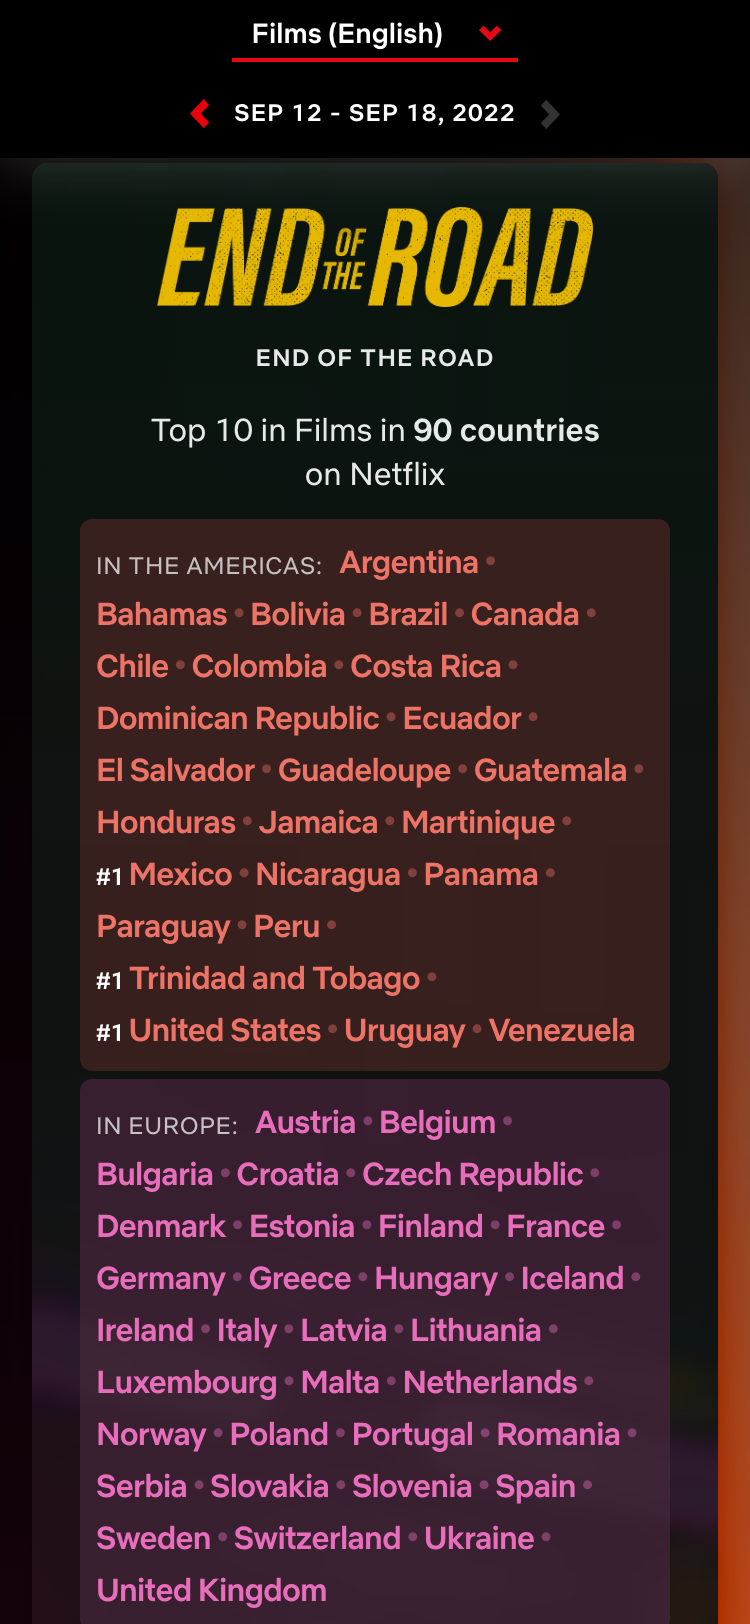 Mobile screenshot of the Netflix Top 10 website. The visible section lists the countries in which 'End of the Road' appears in the top 10 films on Netflix. There are two separate lists, one for the Americas and one for Europe.